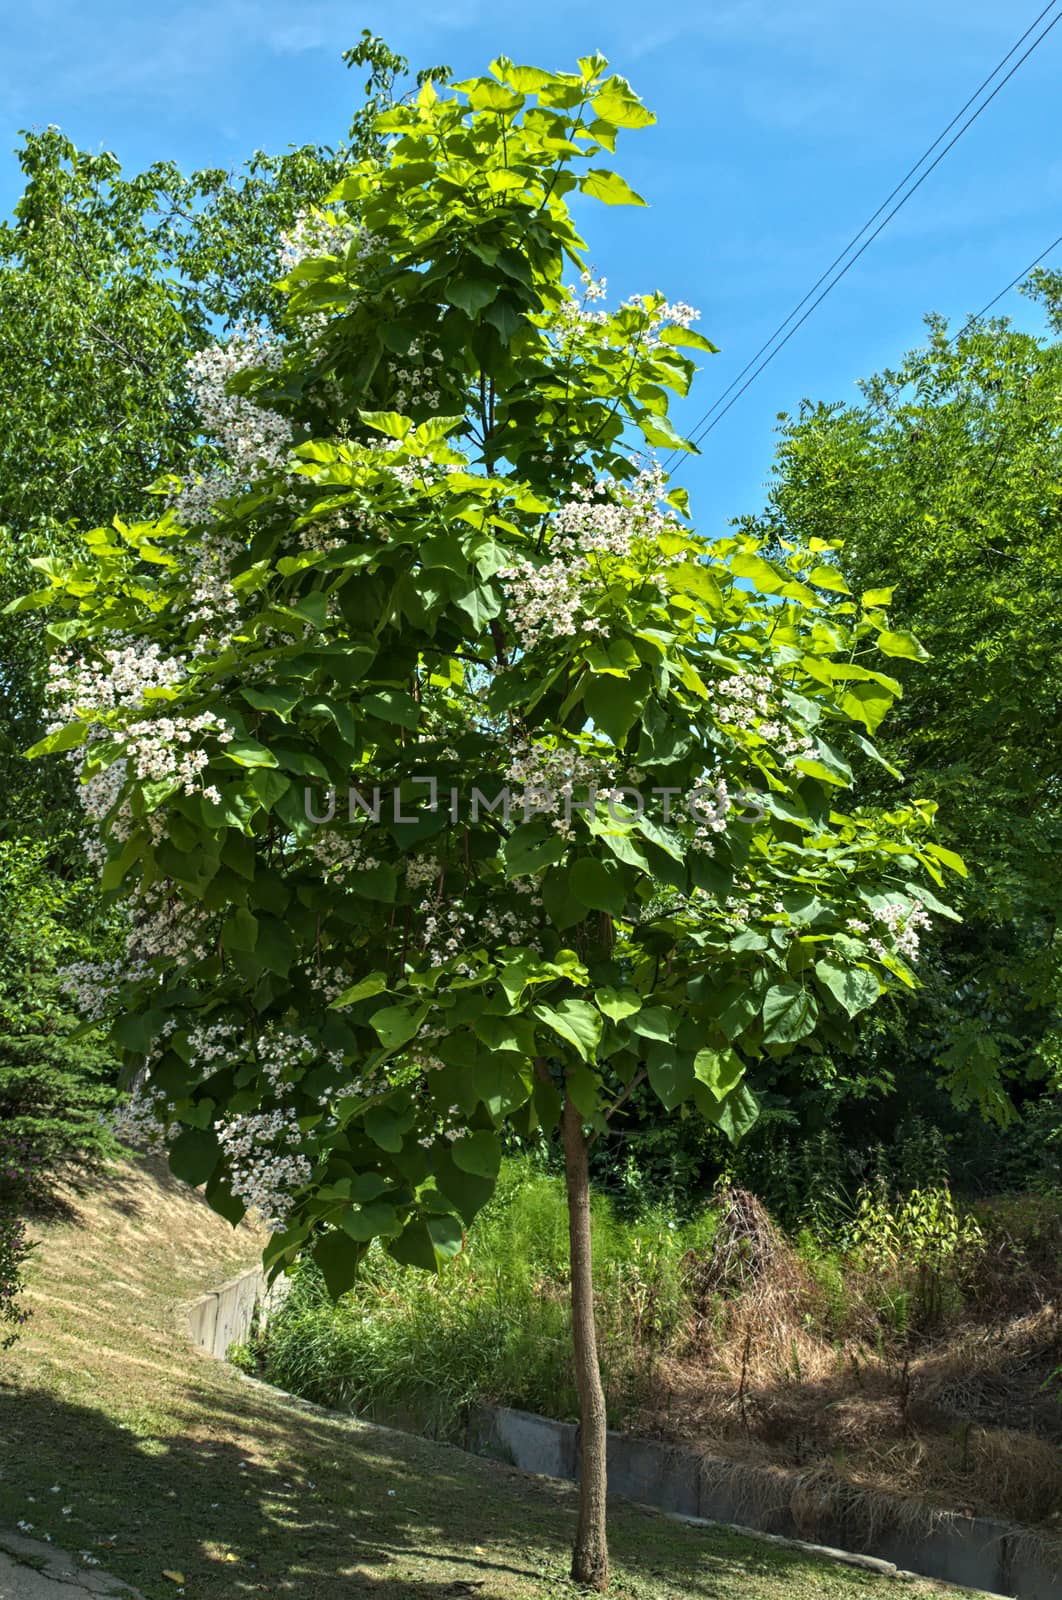 Catalpa tree blooming with big clusters of white flowers by sheriffkule